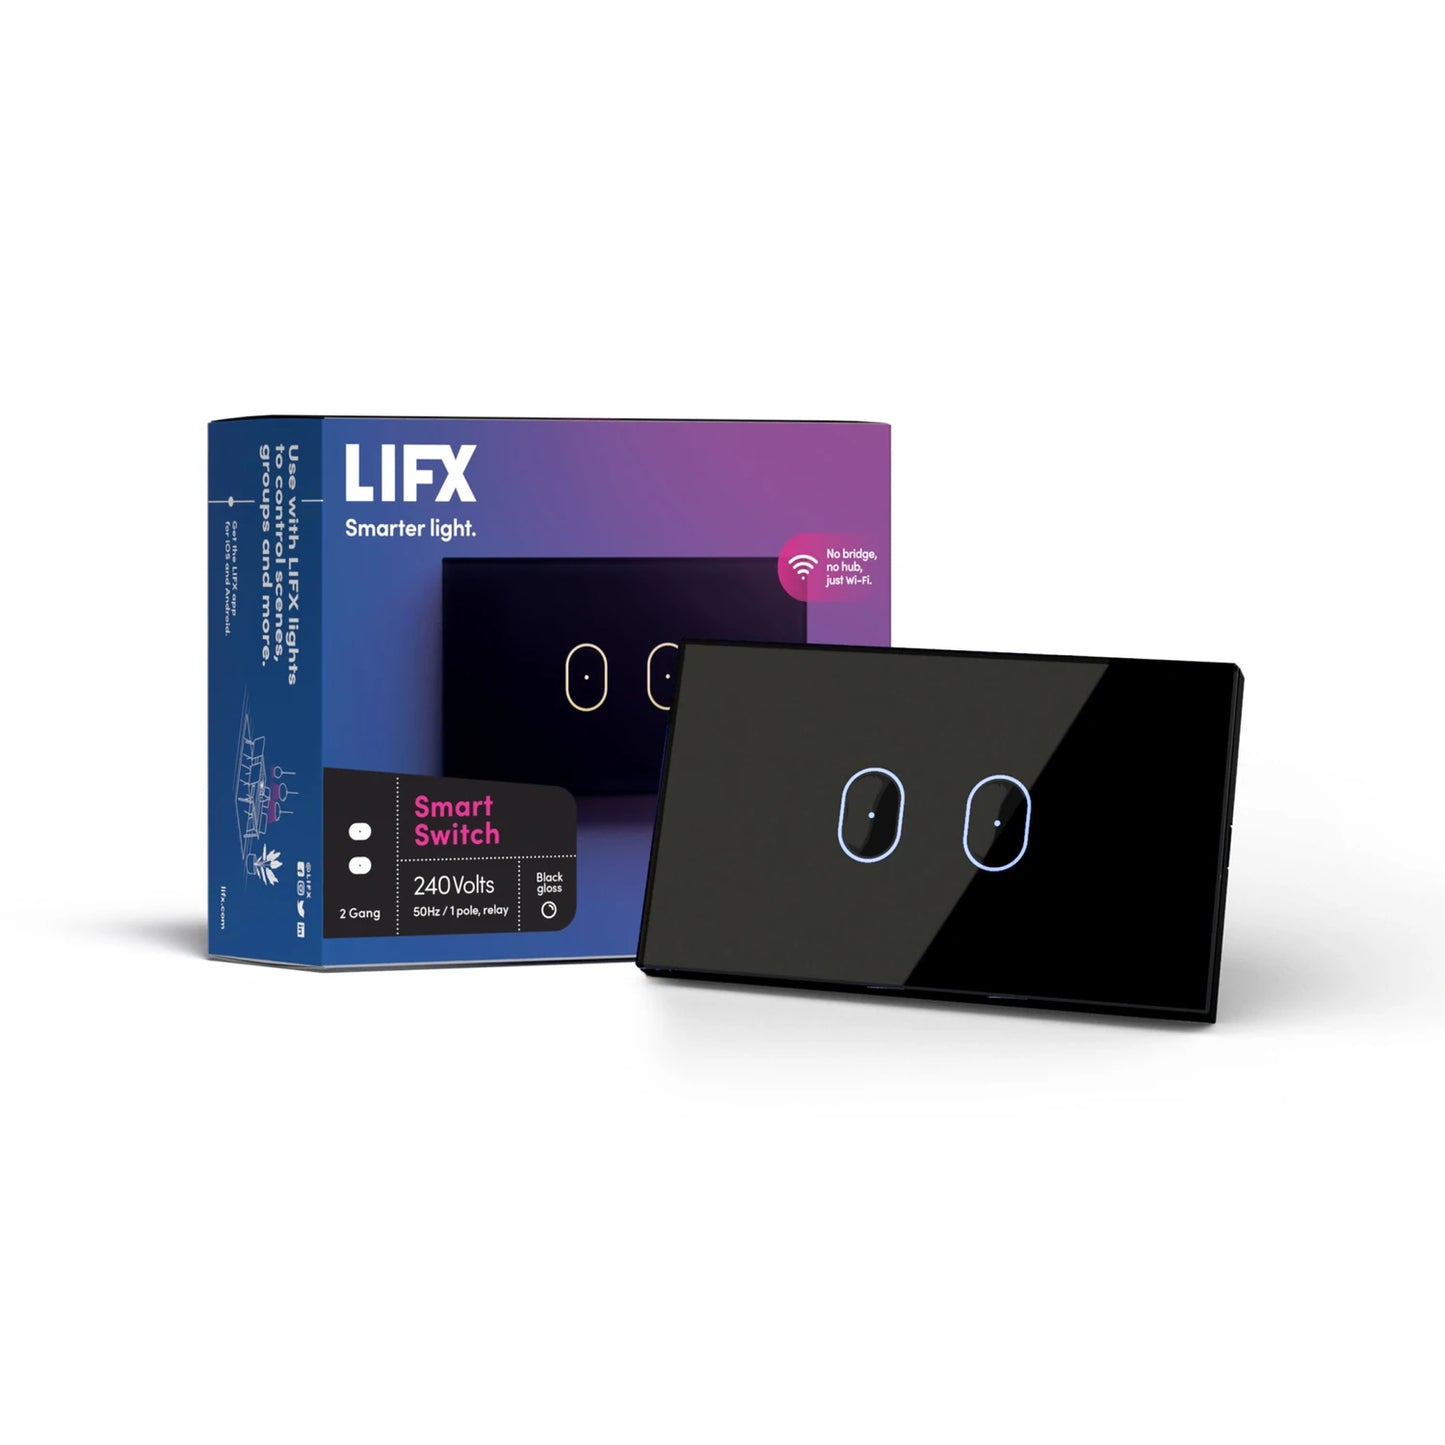 LIFX Black 2-button in-wall Wi-Fi Controlled Smart Switch